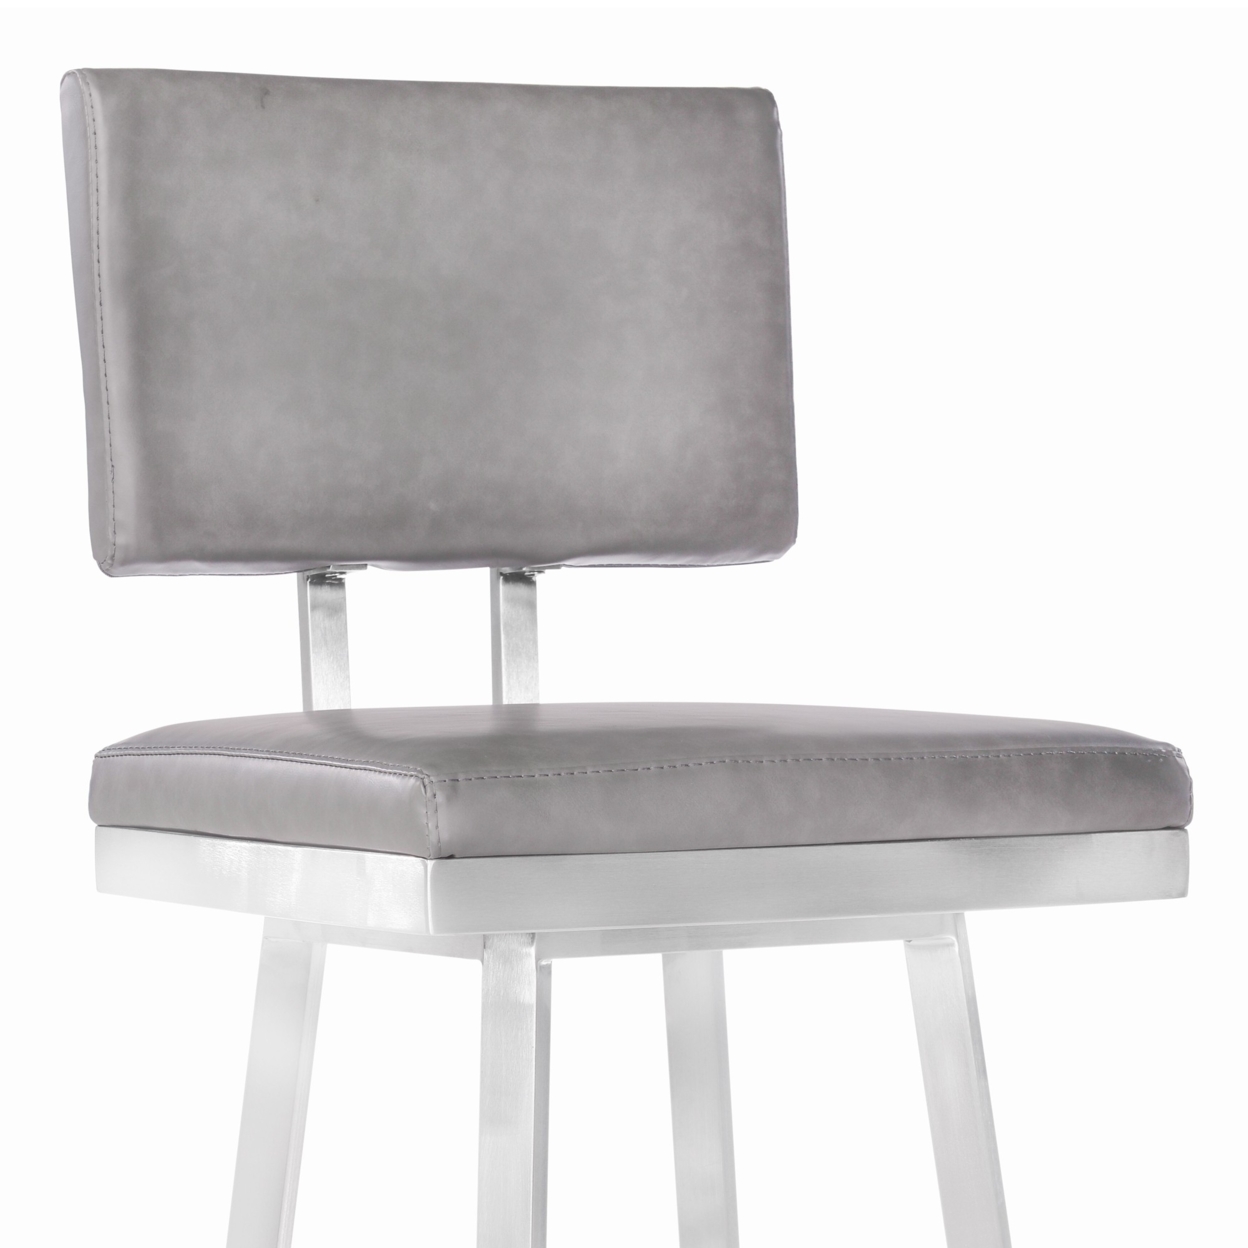 Leatherette Counter Height Armless Barstool With Swivel Mechanism, Silver- Saltoro Sherpi